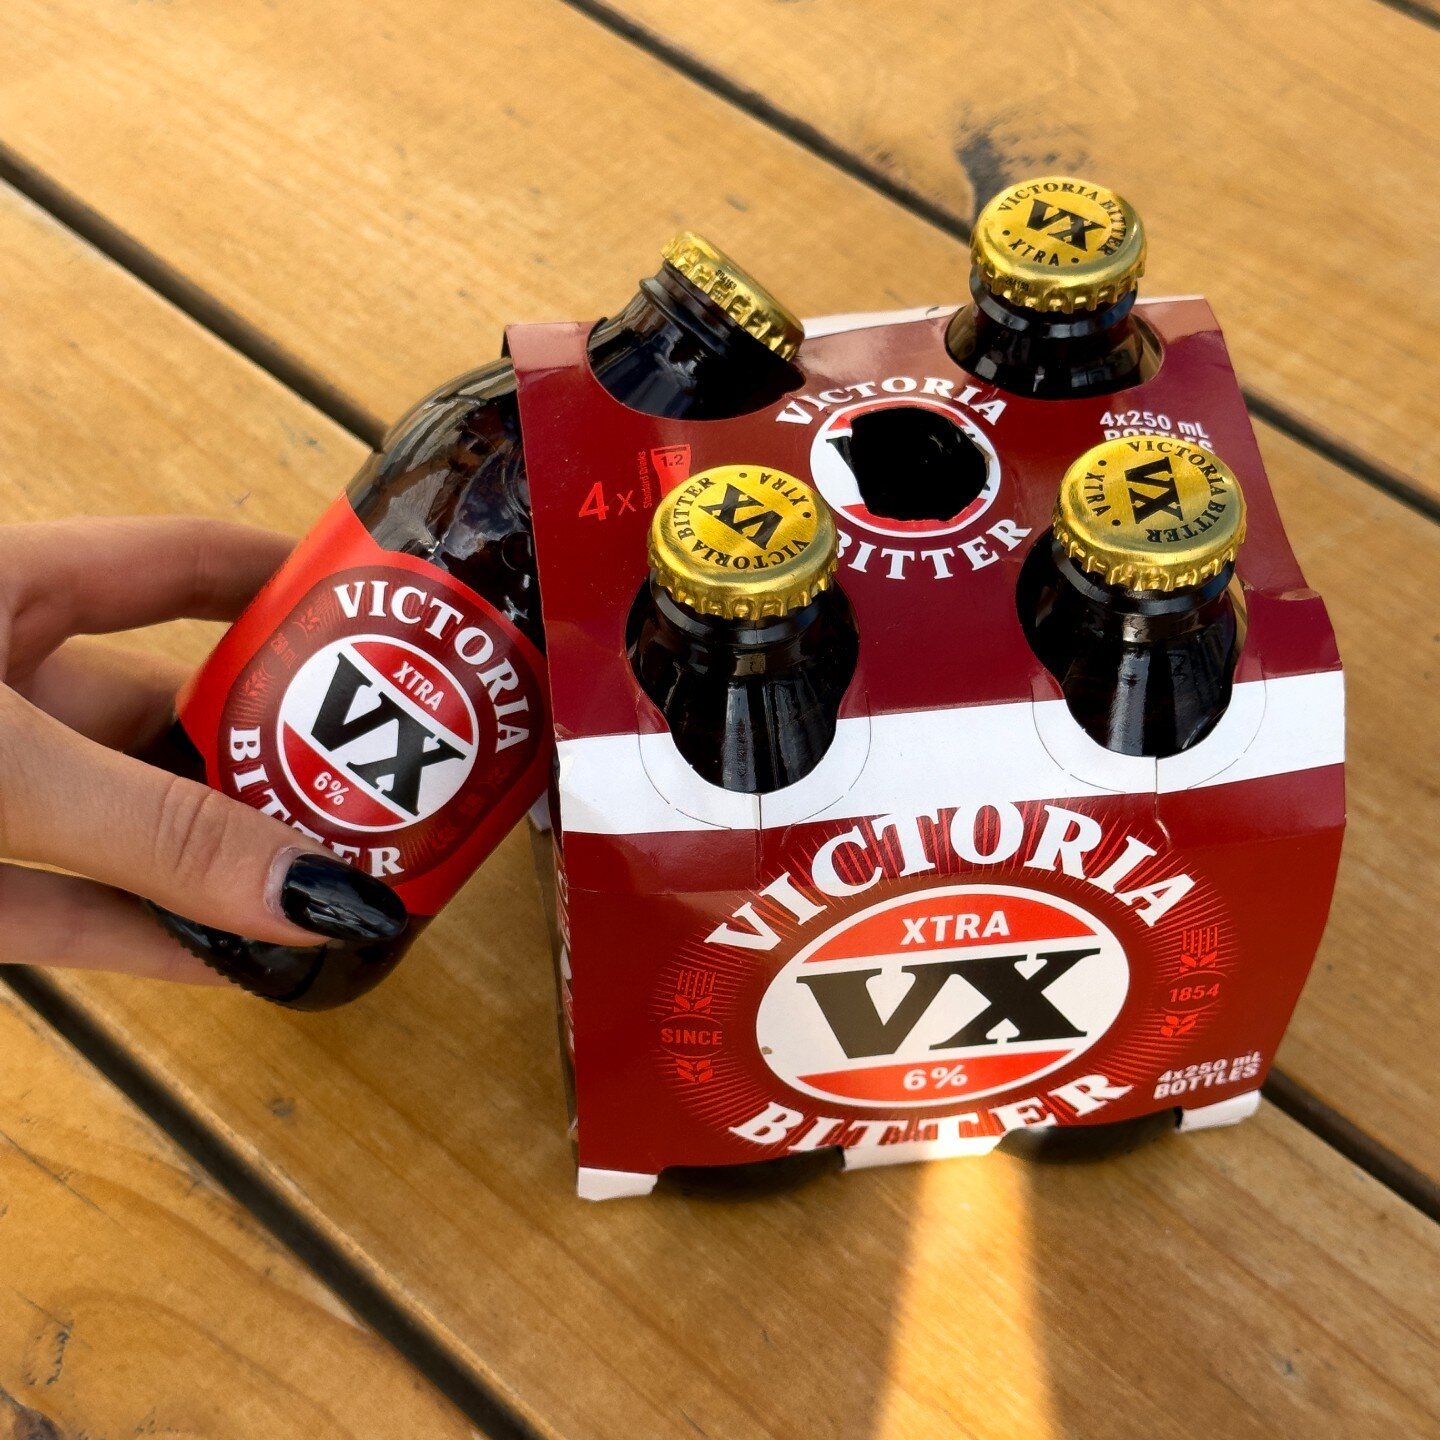 Craving something Xtra special? Indulge in the refreshing Victoria Bitter Xtra VX, boasting a 6% ABV in convenient 250ml stubbies! 🍺

Experience this unique take on a bold and crisp beer by visiting in-store today. Here's to enjoying the timeless ta